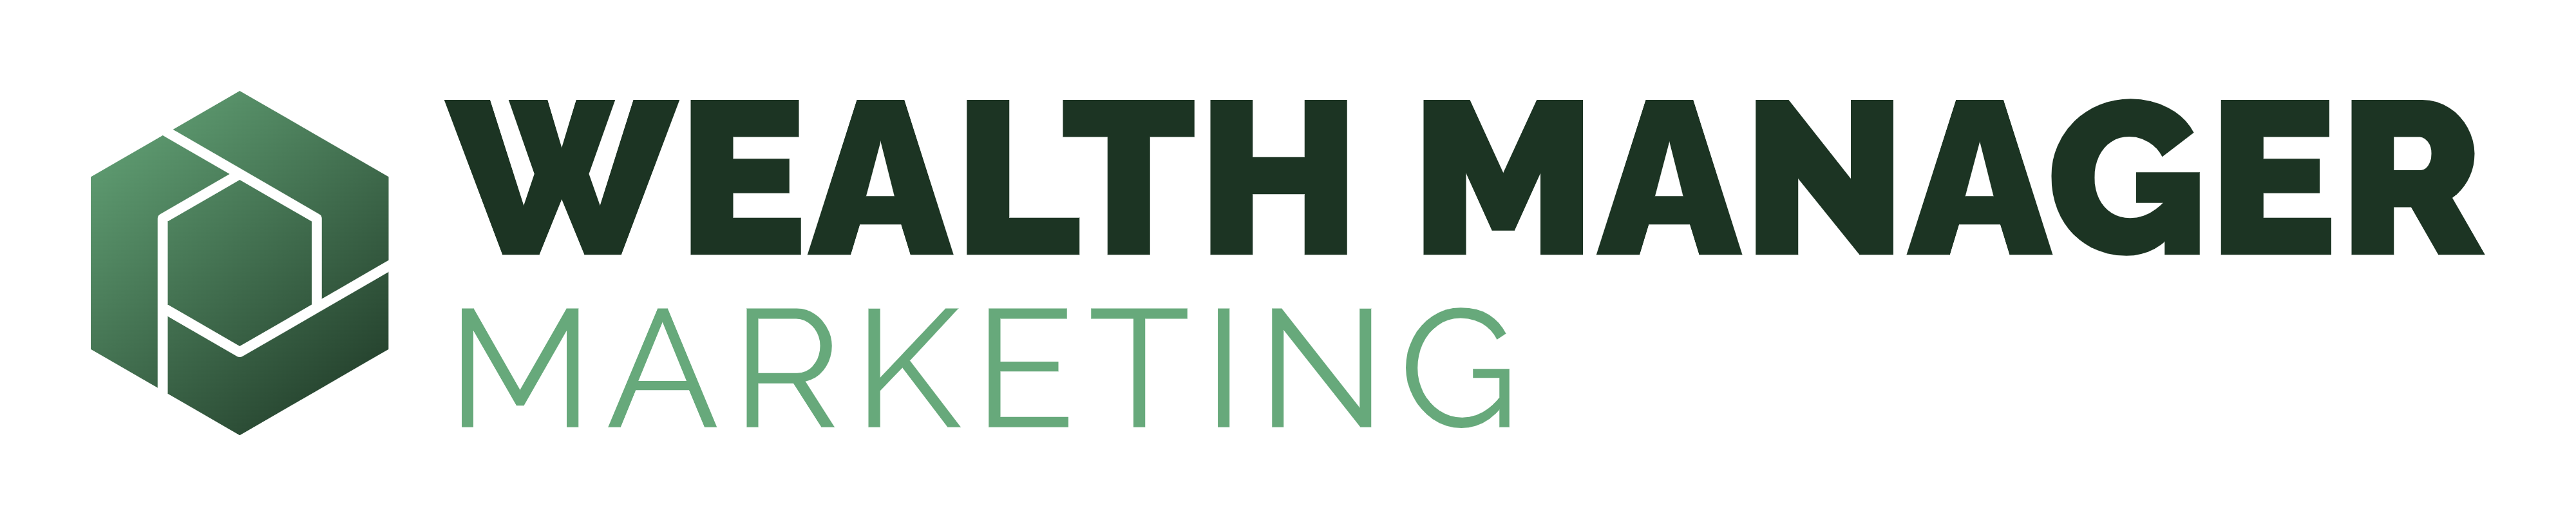 Wealth Manager Marketing